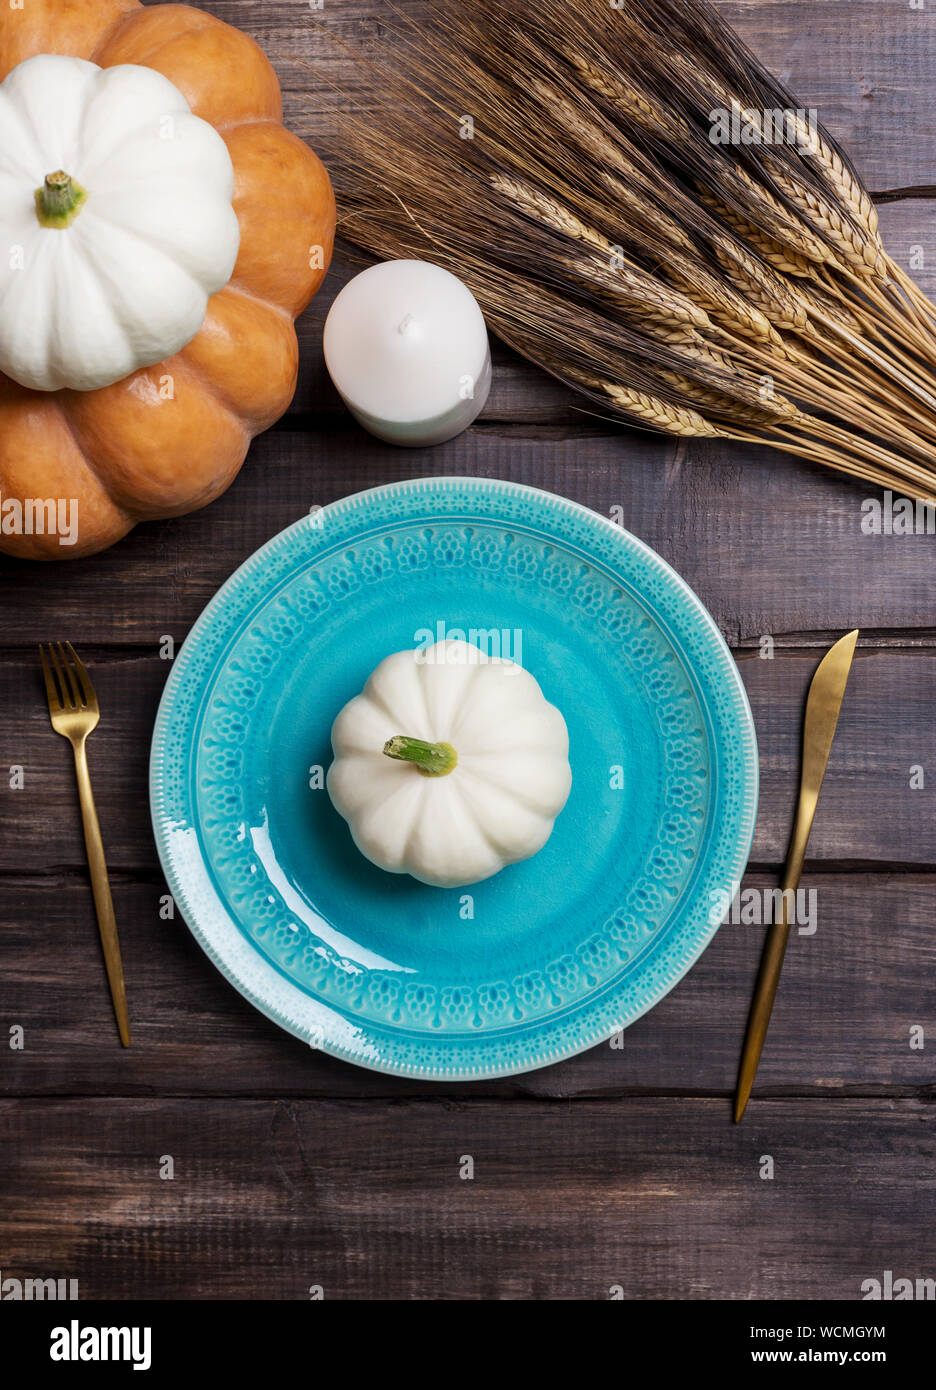 Blue serving plate with white baby squash on it, golden tableware, candle and wheat on wooden table. Concept of harvest table set, dinning for Thanksg Stock Photo